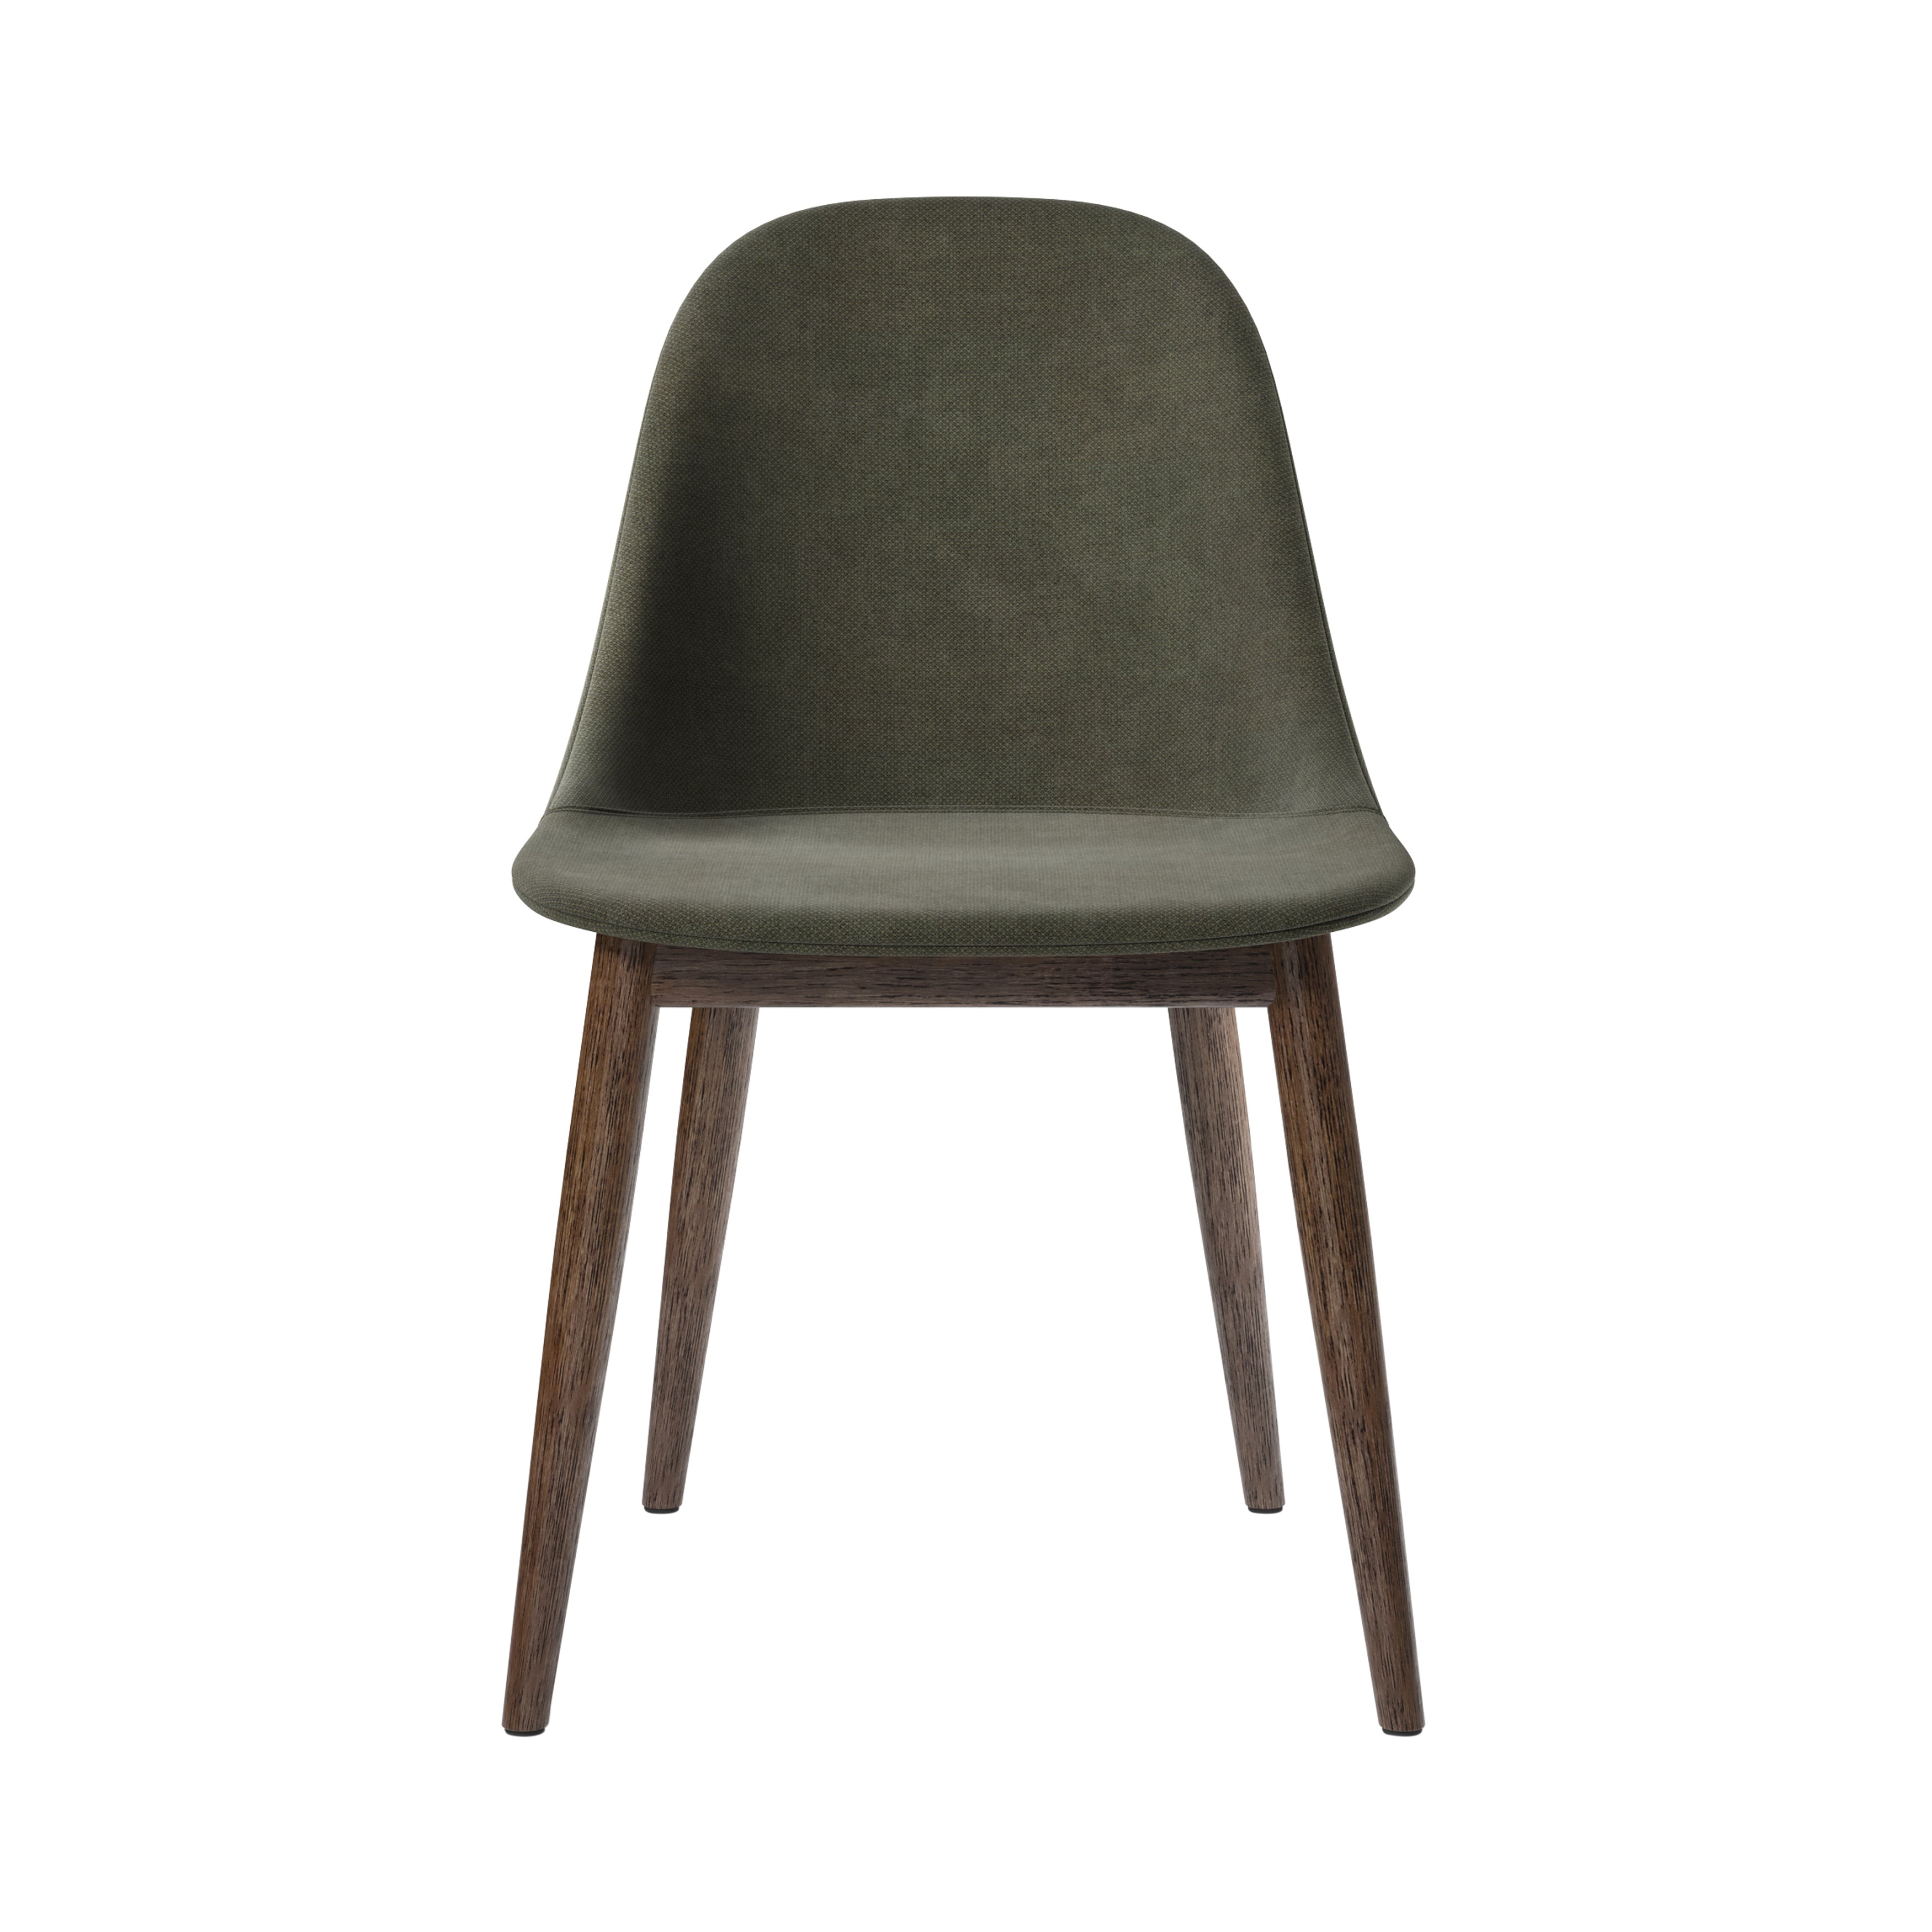 Harbour Side Chair: Wood Base Upholstered + Dark Stained Oak + Fiord2 961